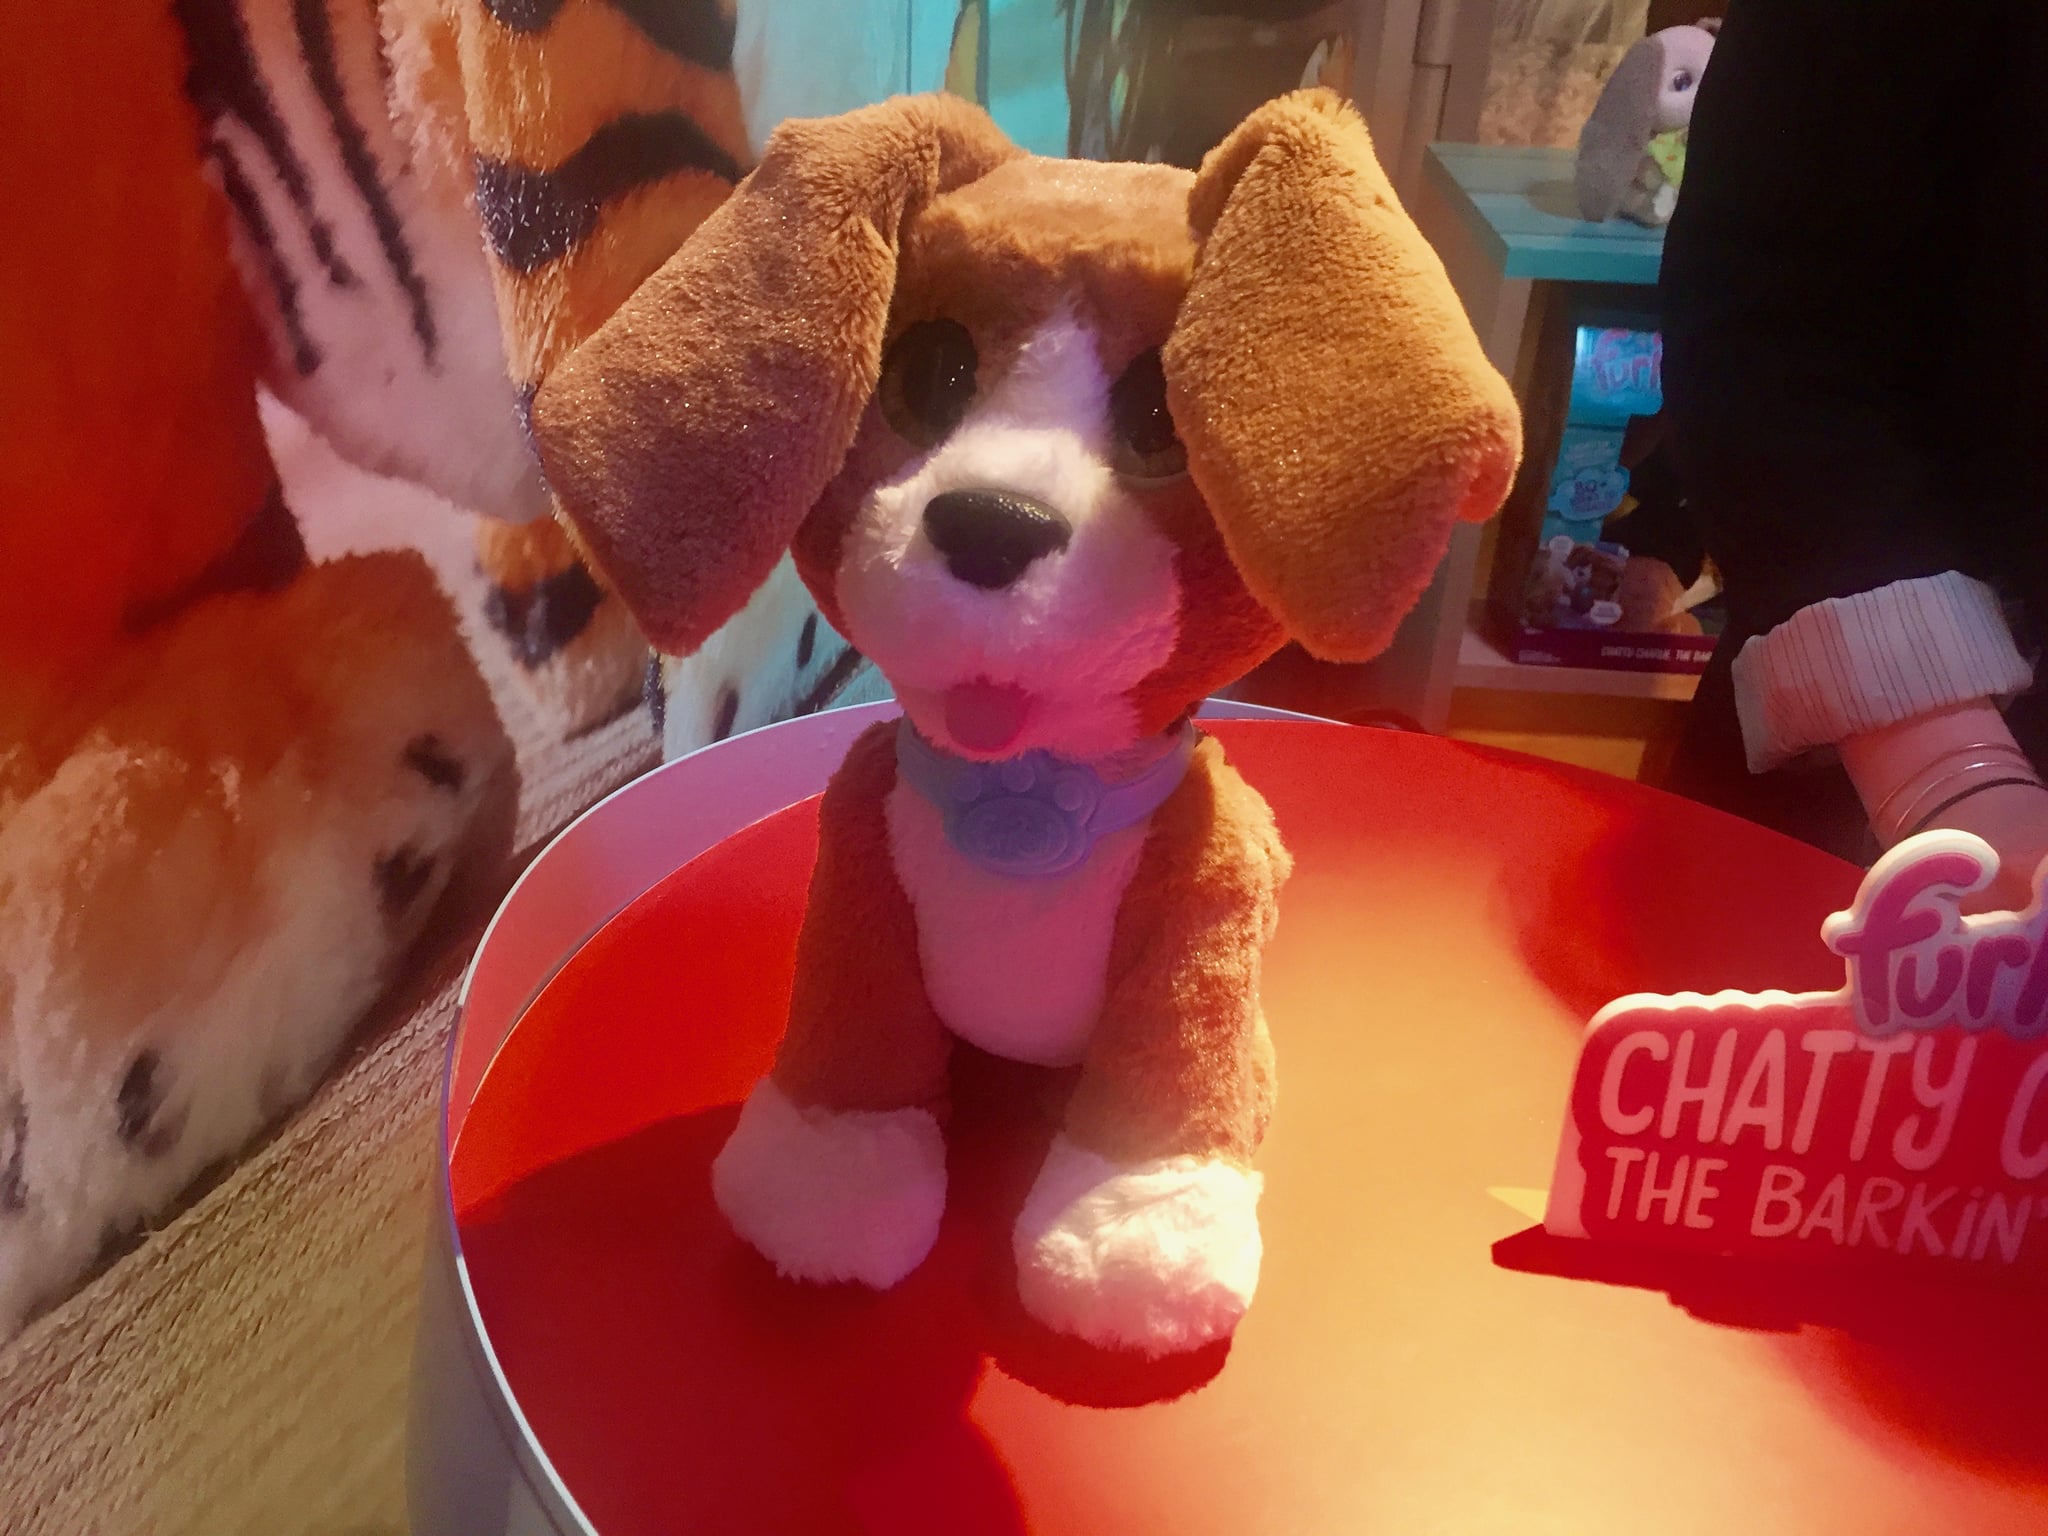 Furreal Chatty Charlie The Barkin Beagle 2 Brand New Toys Your Kids Are Going To Ask For This Year Popsugar Family Photo 216